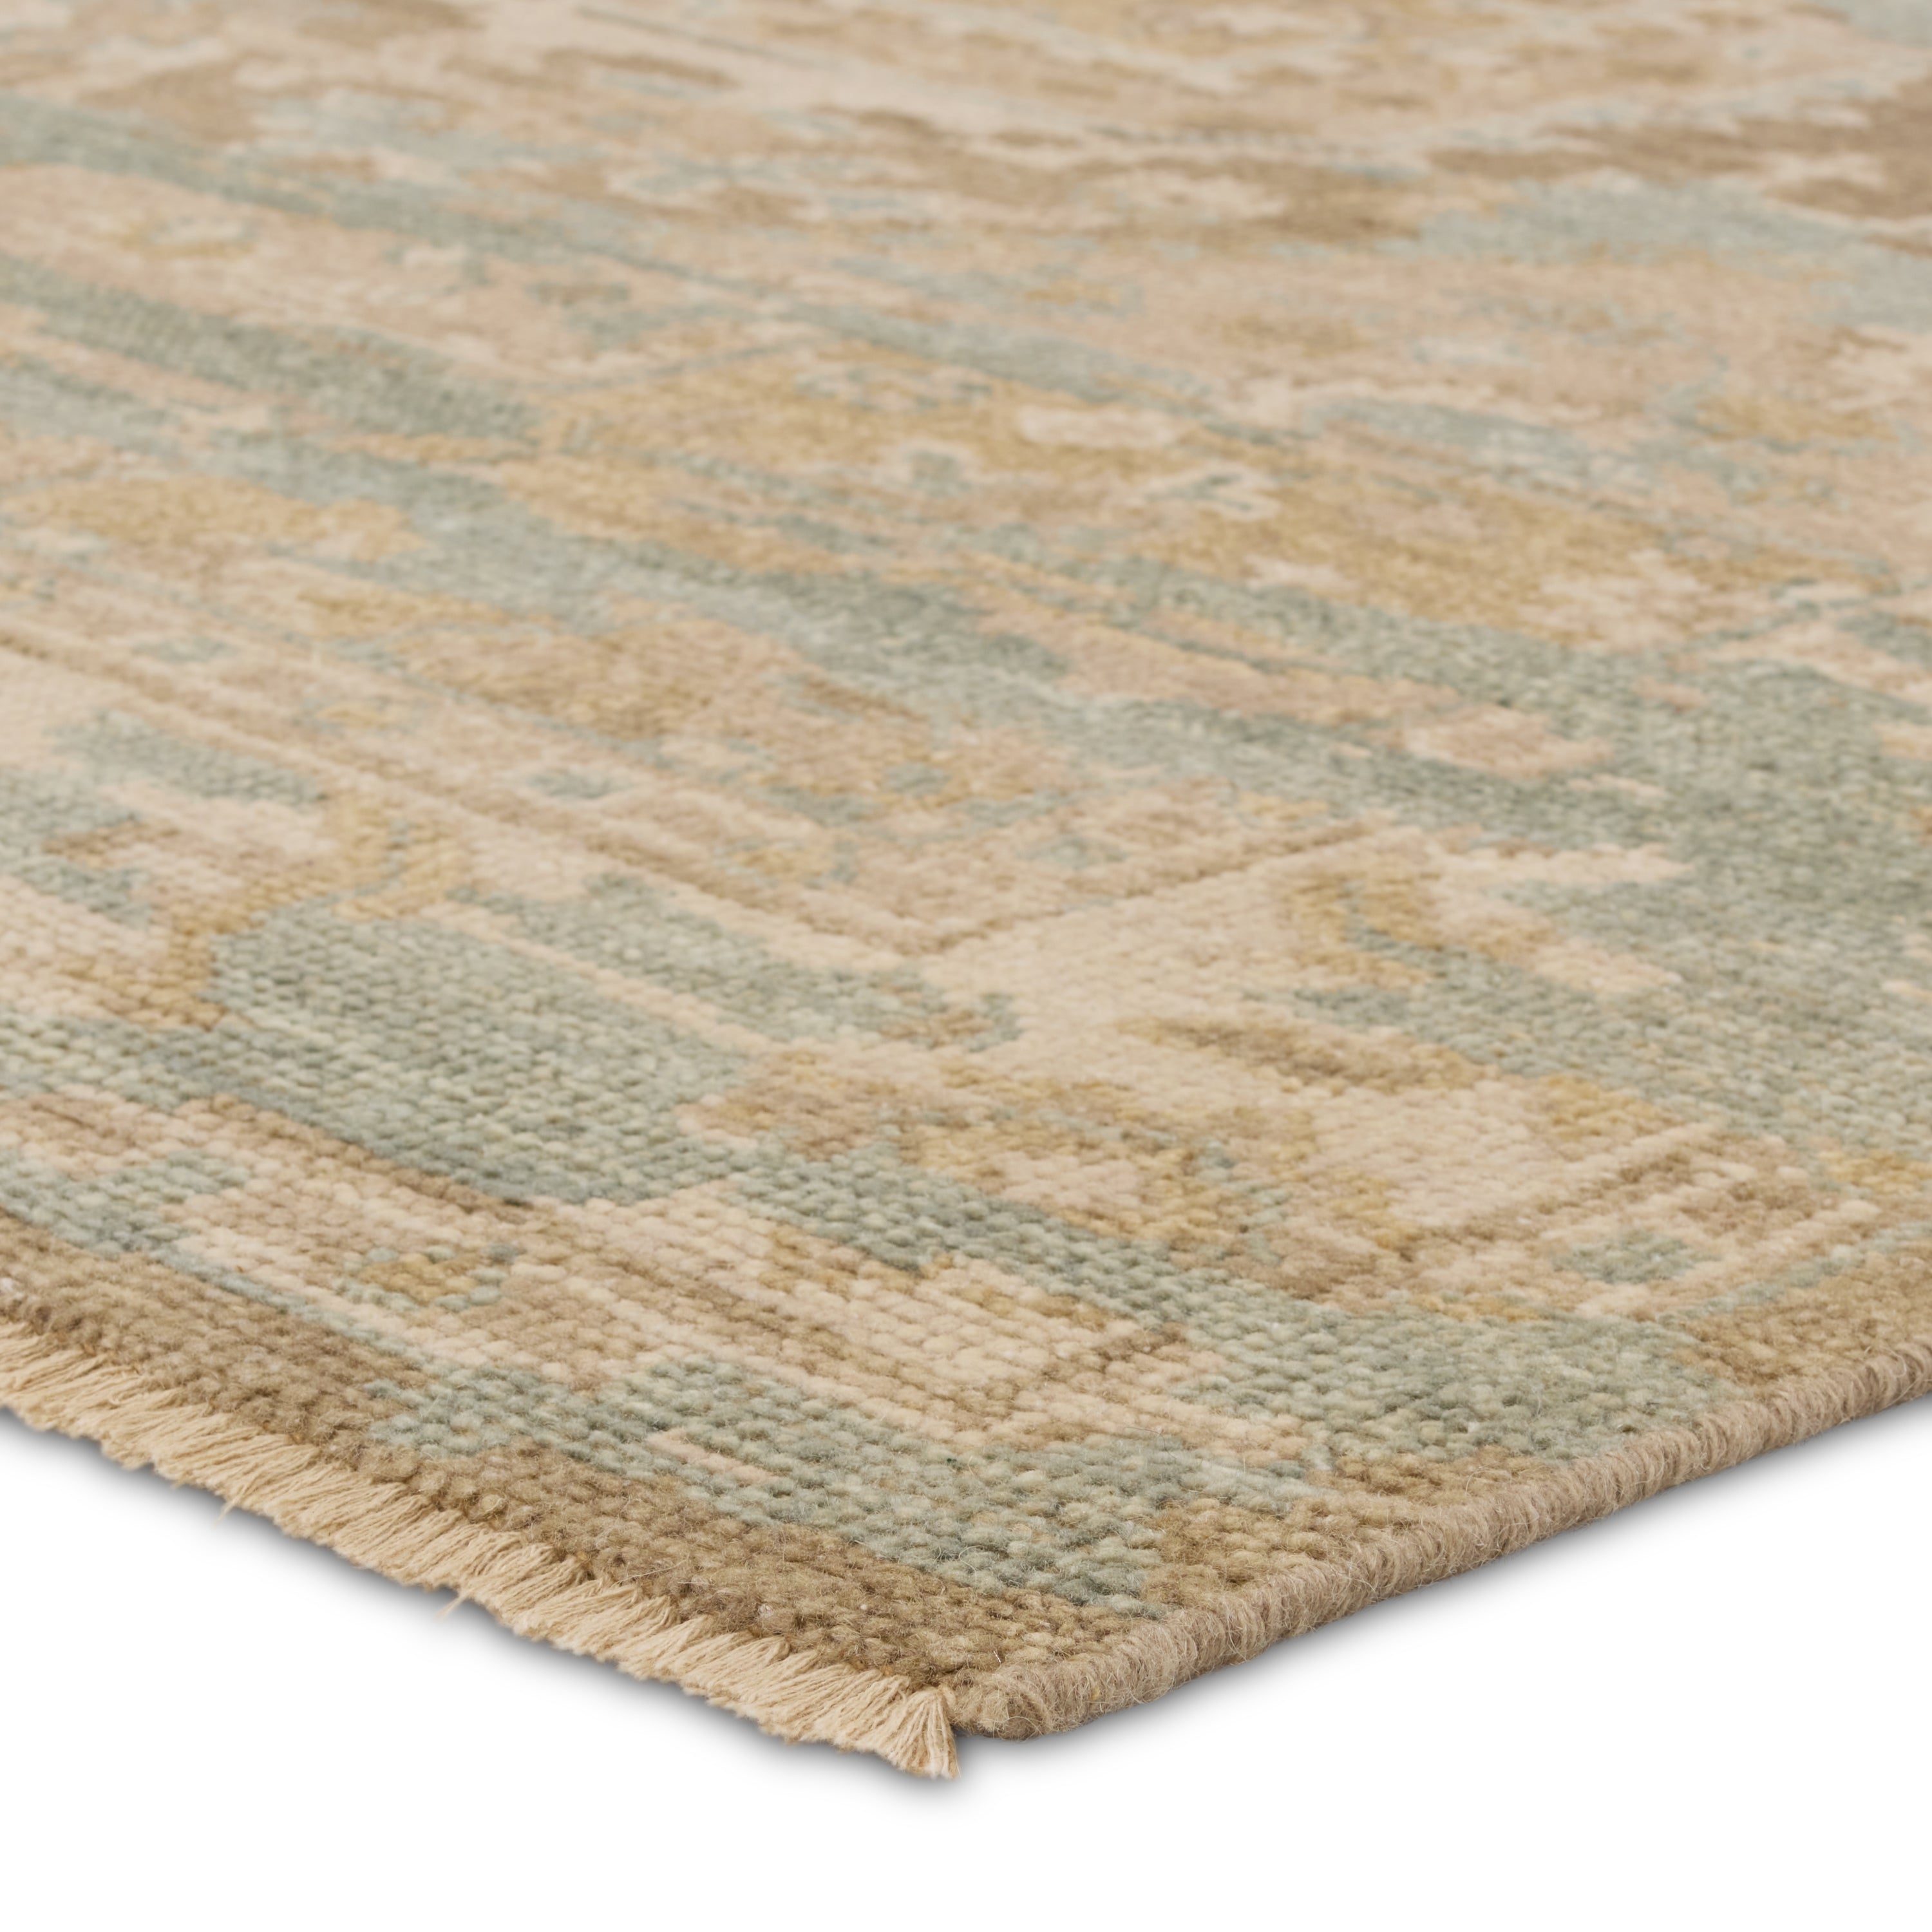 The Rhapsody collection features heirloom-quality designs of stunningly abrashed Old World patterns. The Cadenza area rug boasts a beautifully distressed medallion motif with a decorative border. The khaki tones are accented with slate, beige, cream, and taupe hues for added depth and intrigue. This durable wool handknot anchors living spaces with a fresh take on vintage style. Amethyst Home provides interior design, new construction, custom furniture, and area rugs in the Monterey metro area.